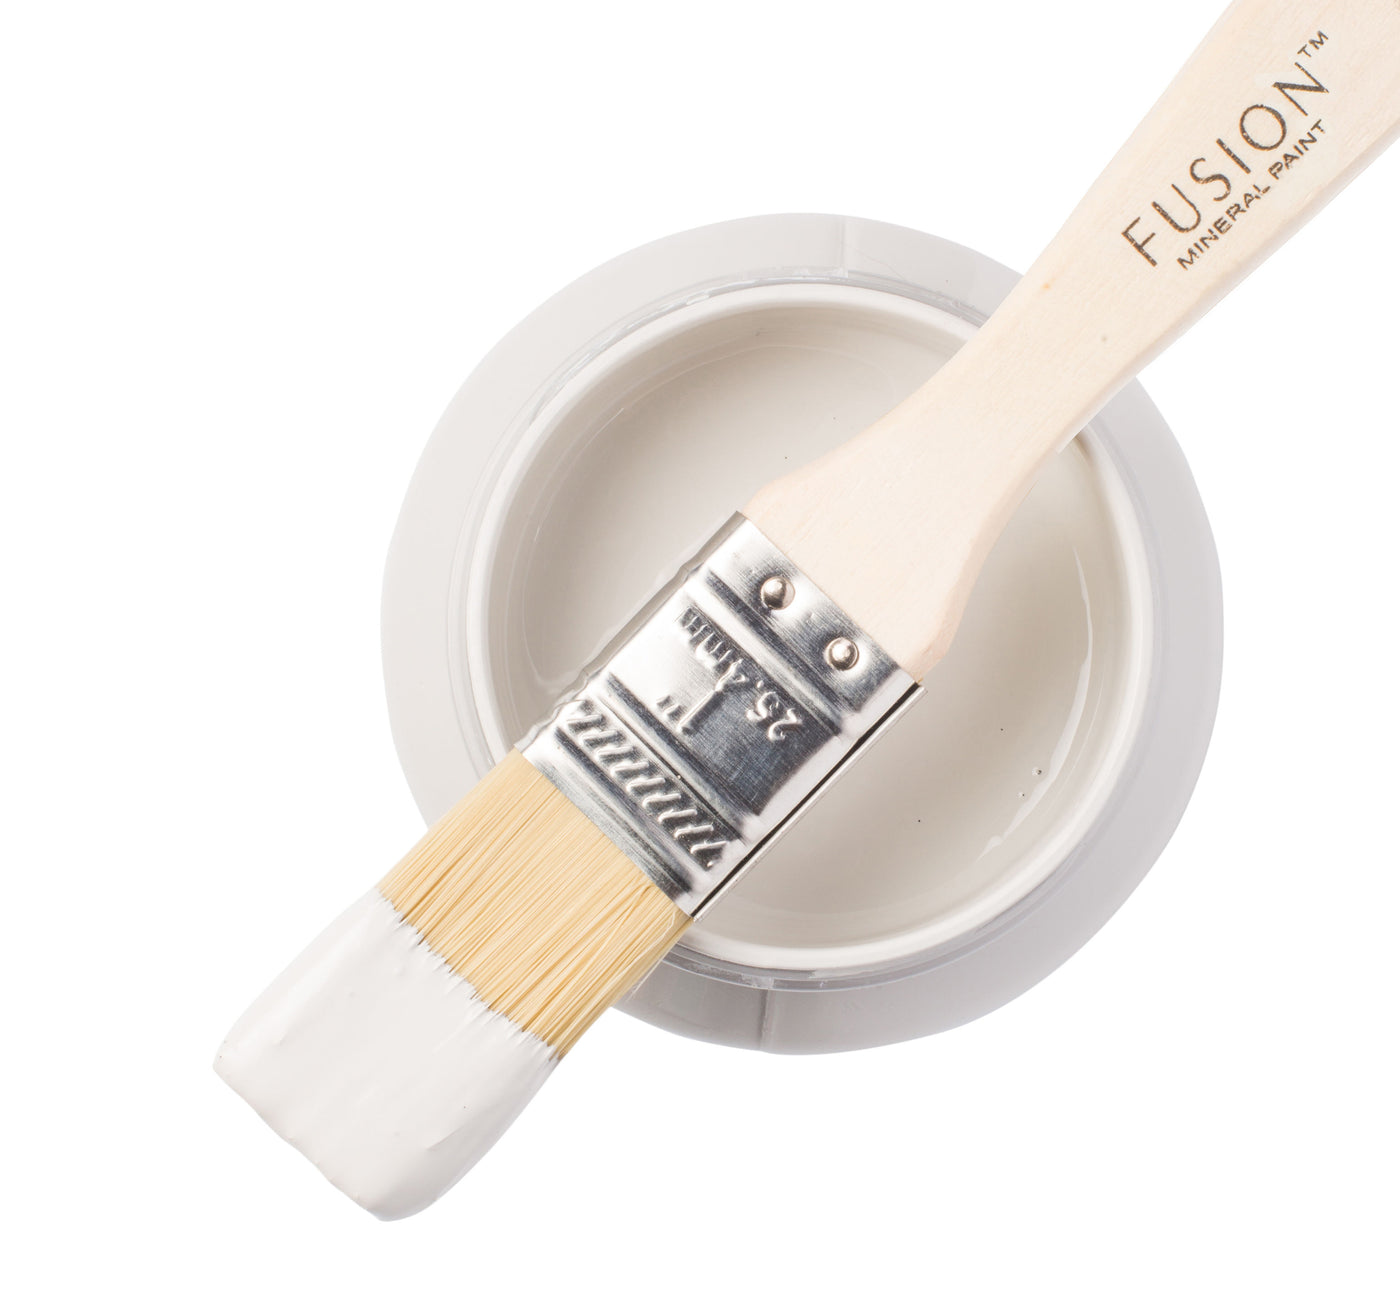 Neutral silver paint can and brush from Fusion Mineral Paint